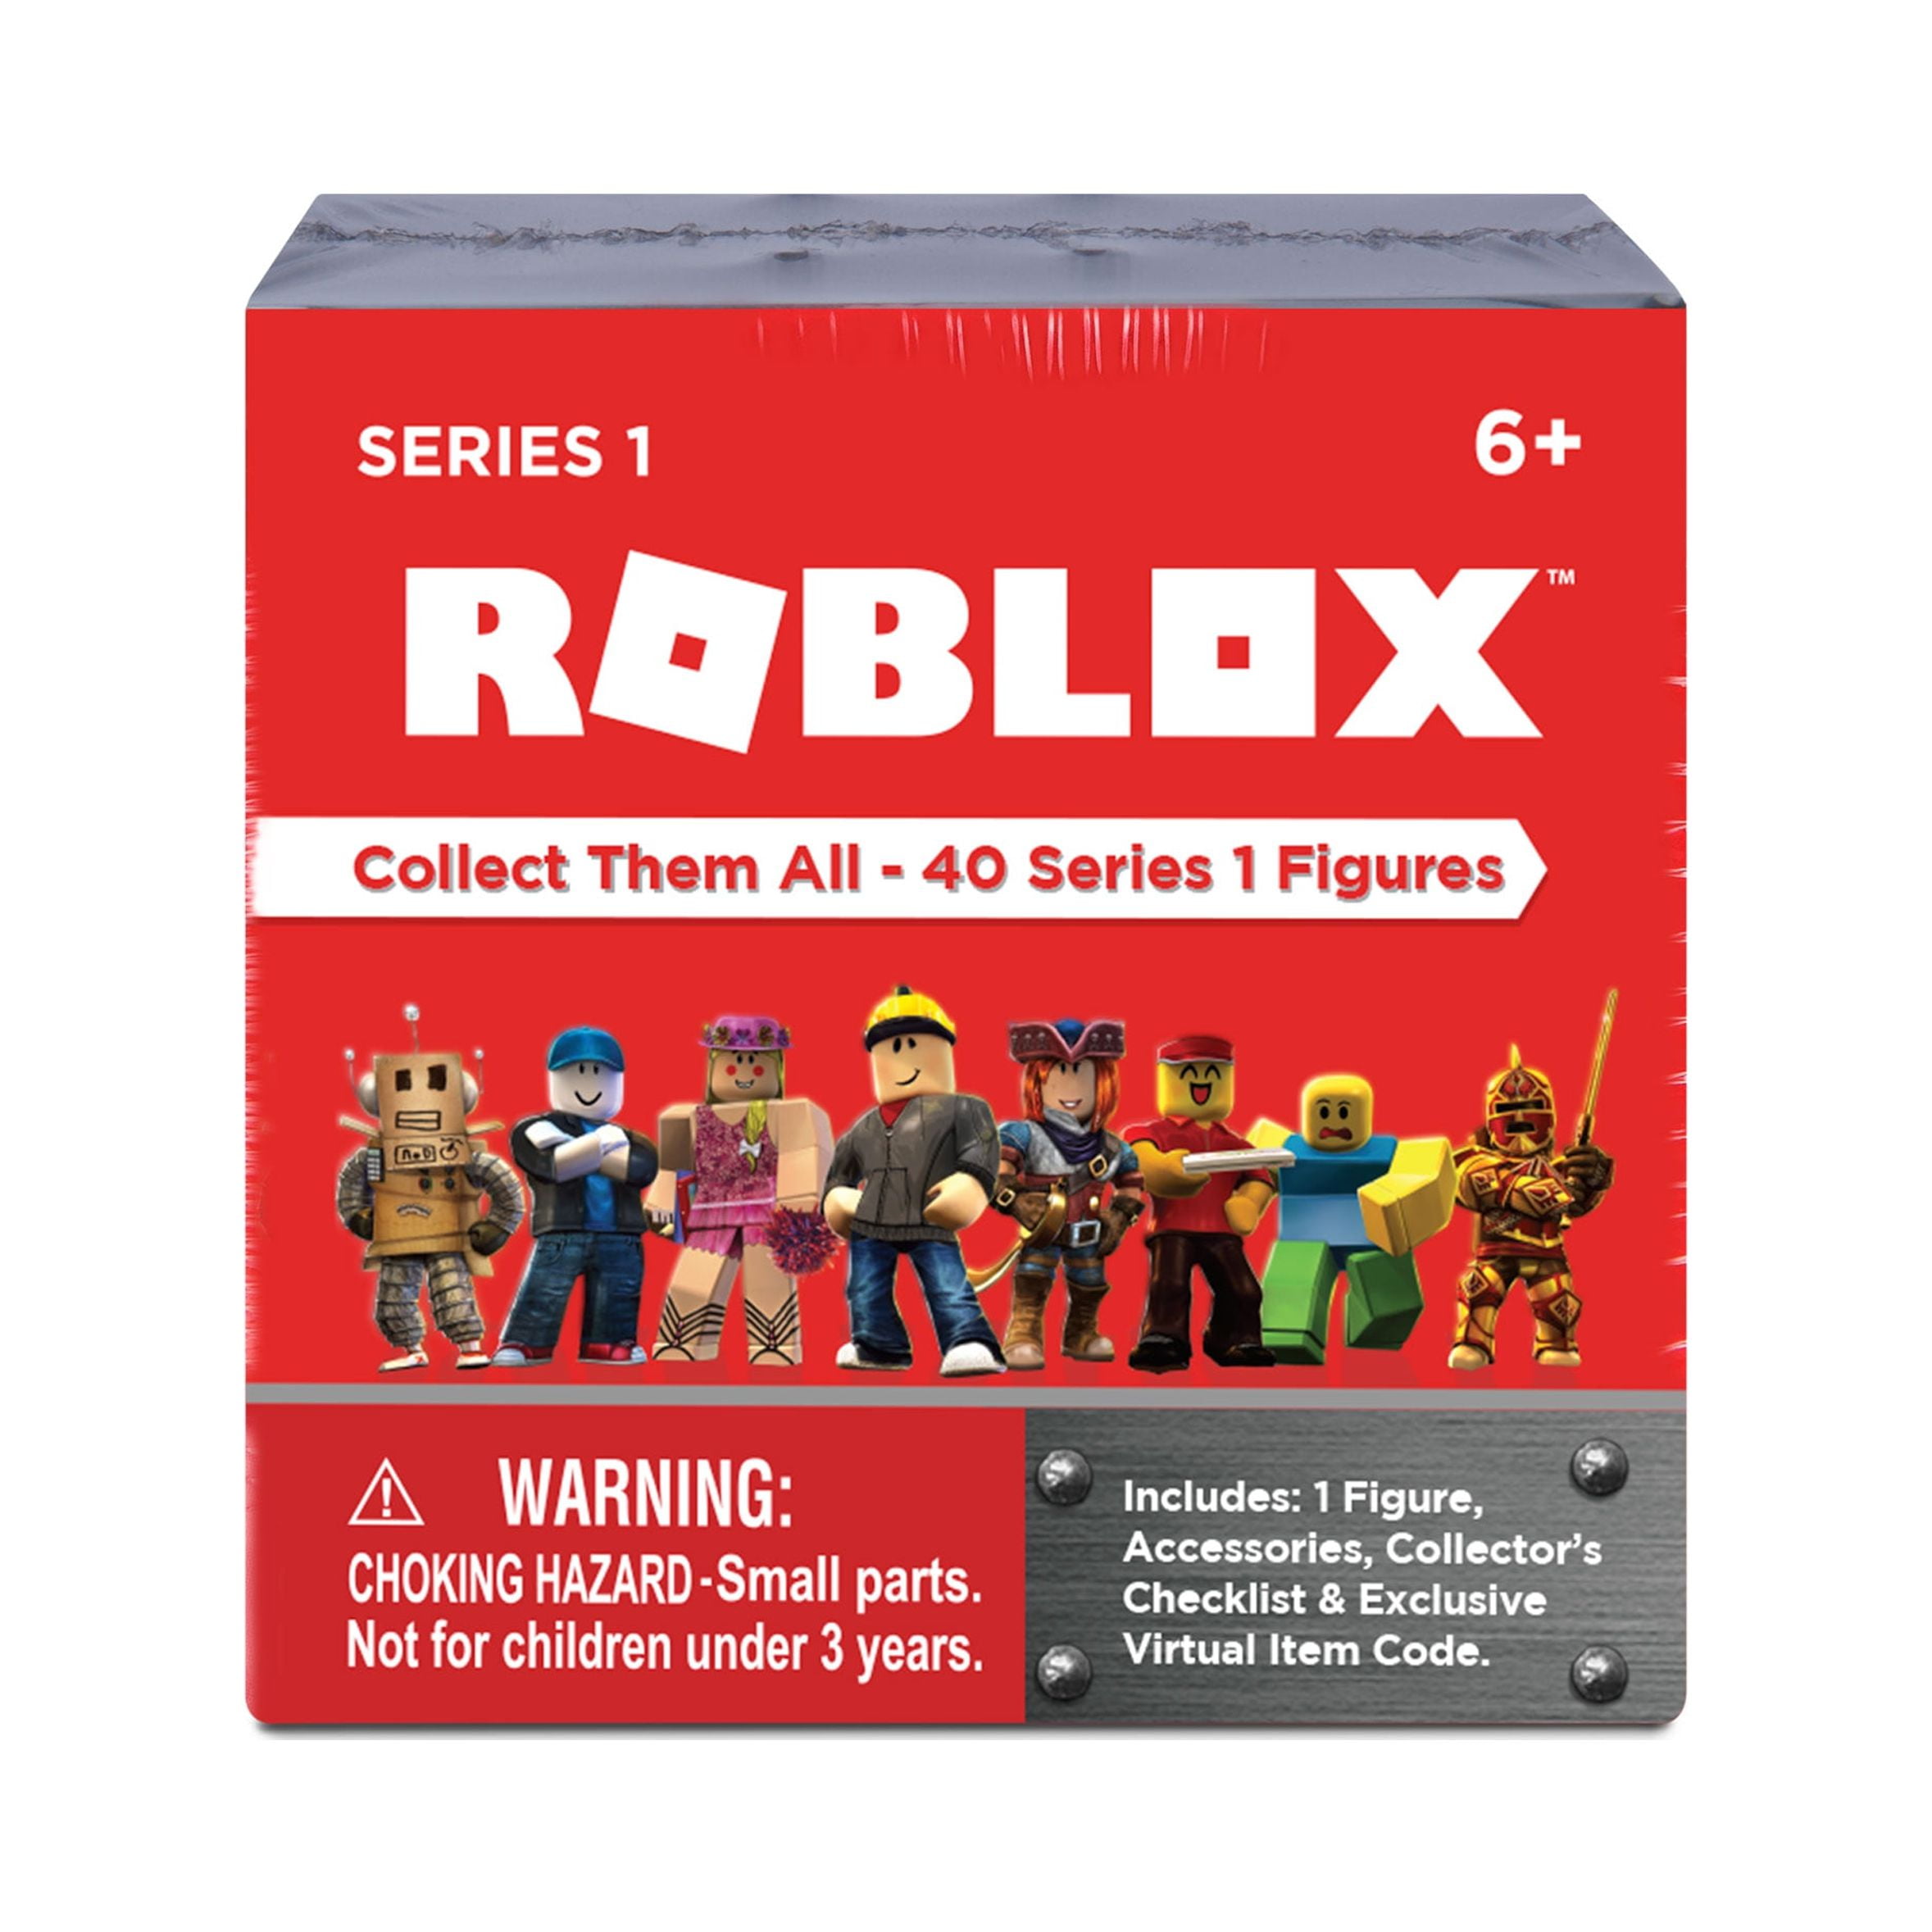 Roblox Action & Toy Figures Avatar Wikia, Lego girl, game, text